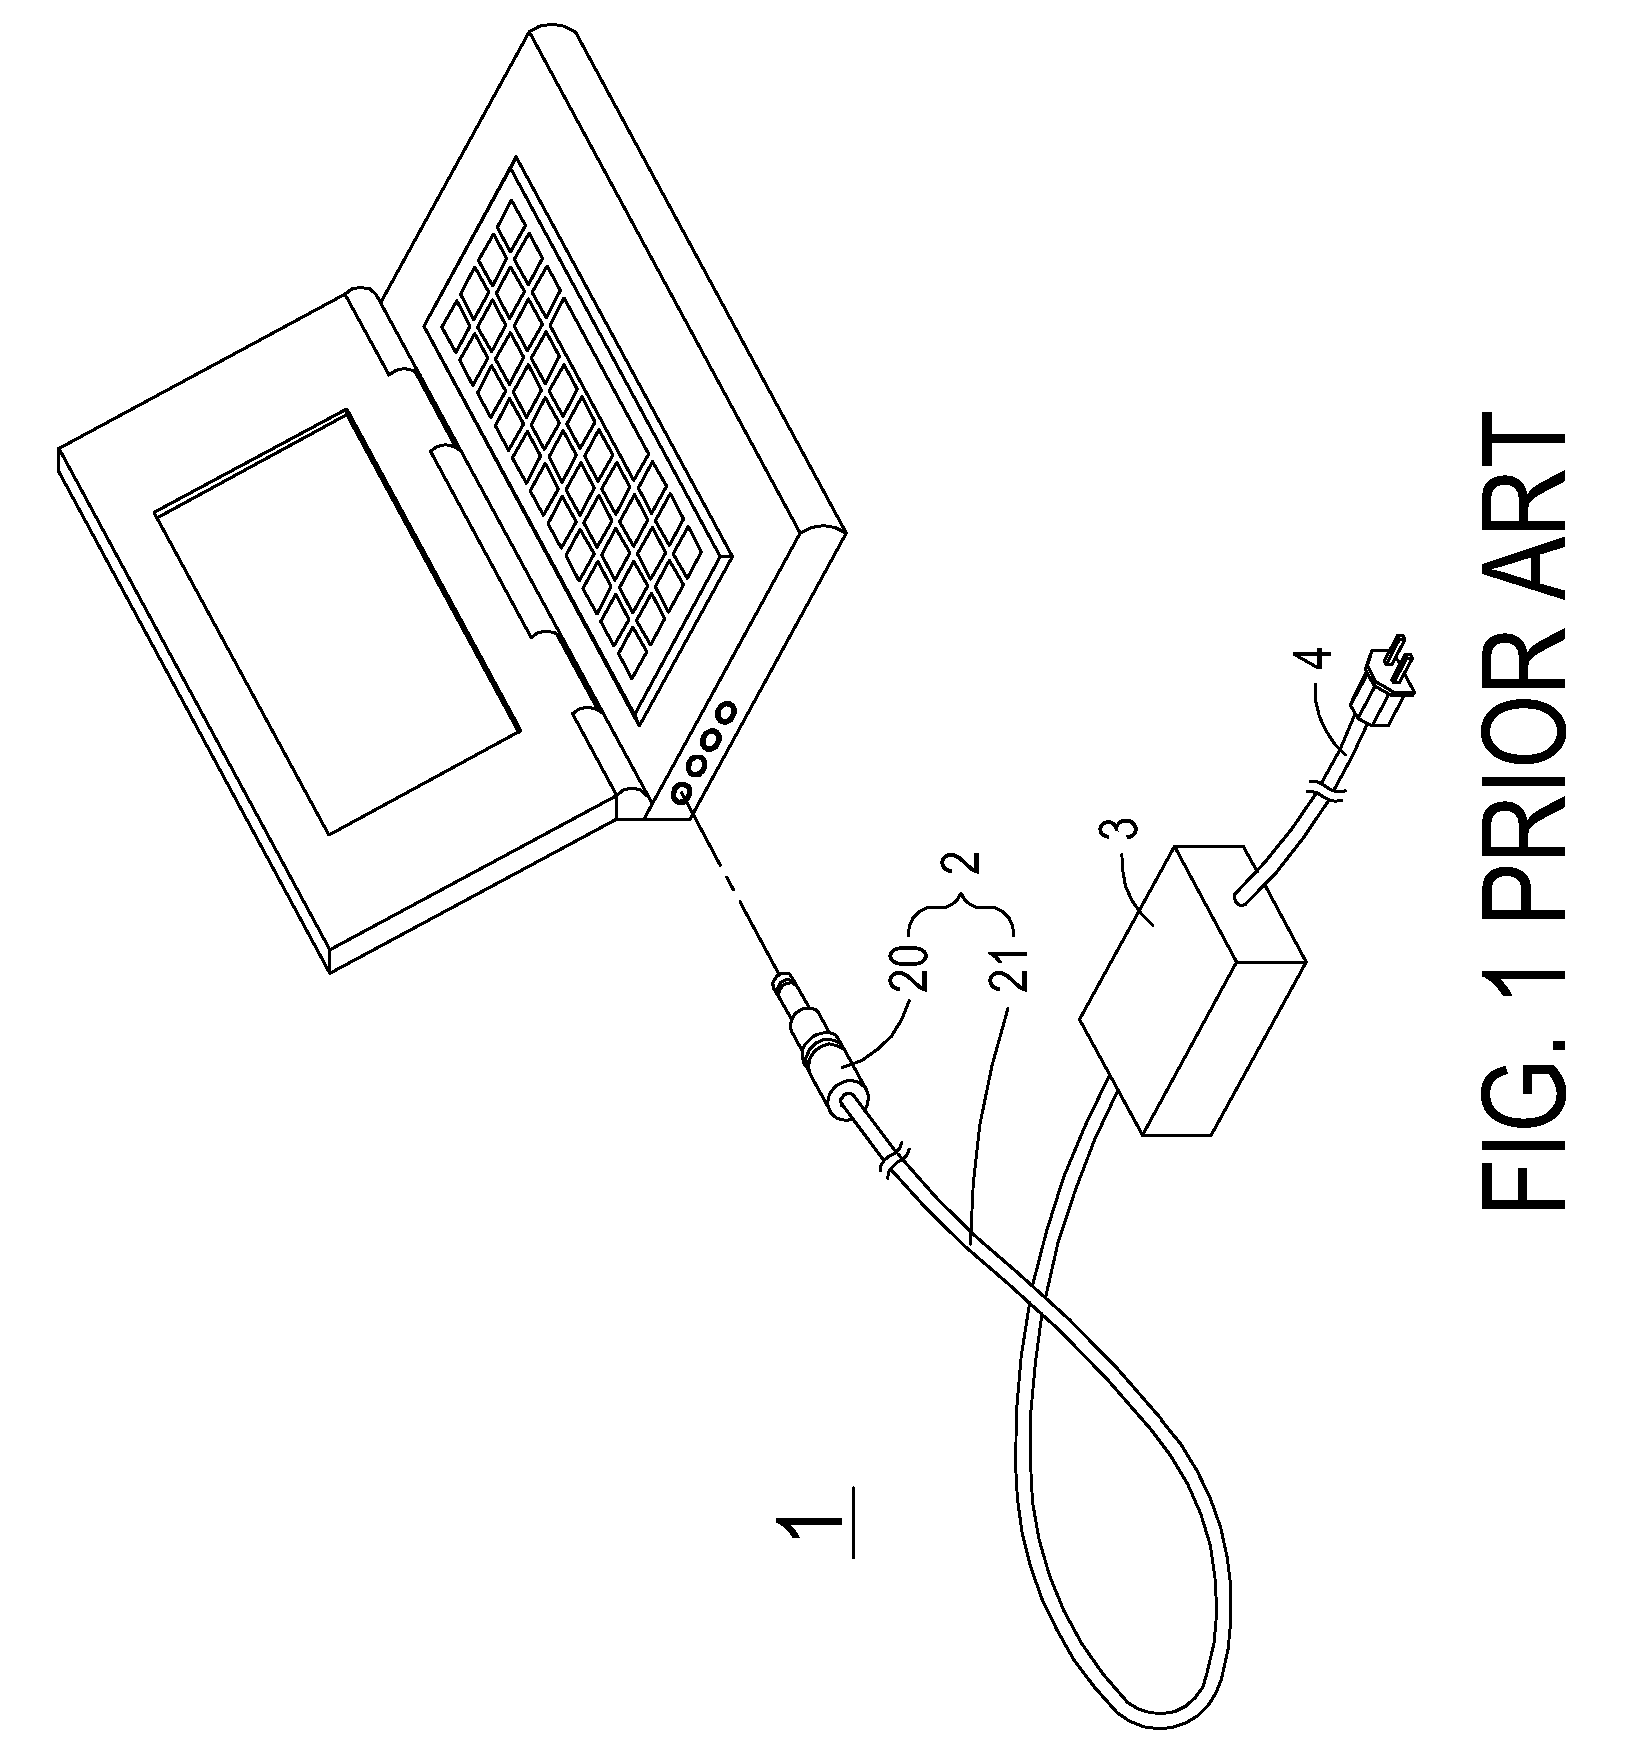 Power connector and power supply cord set having such power connector